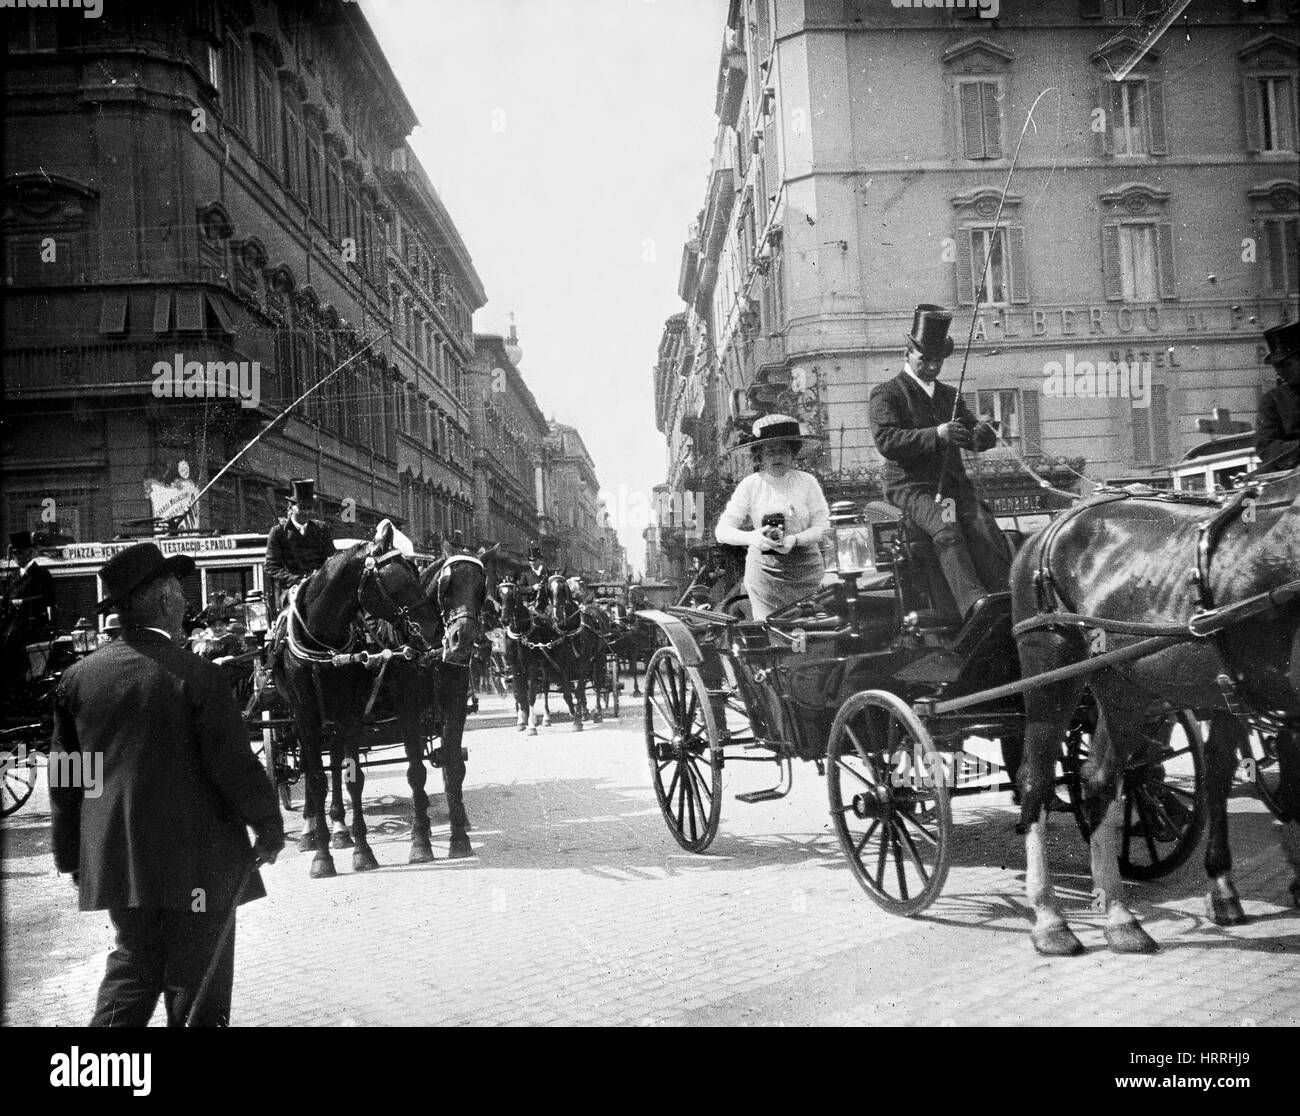 Horses and carriages in Piazza Venezia, Rome, Italy. 1924 Stock Photo